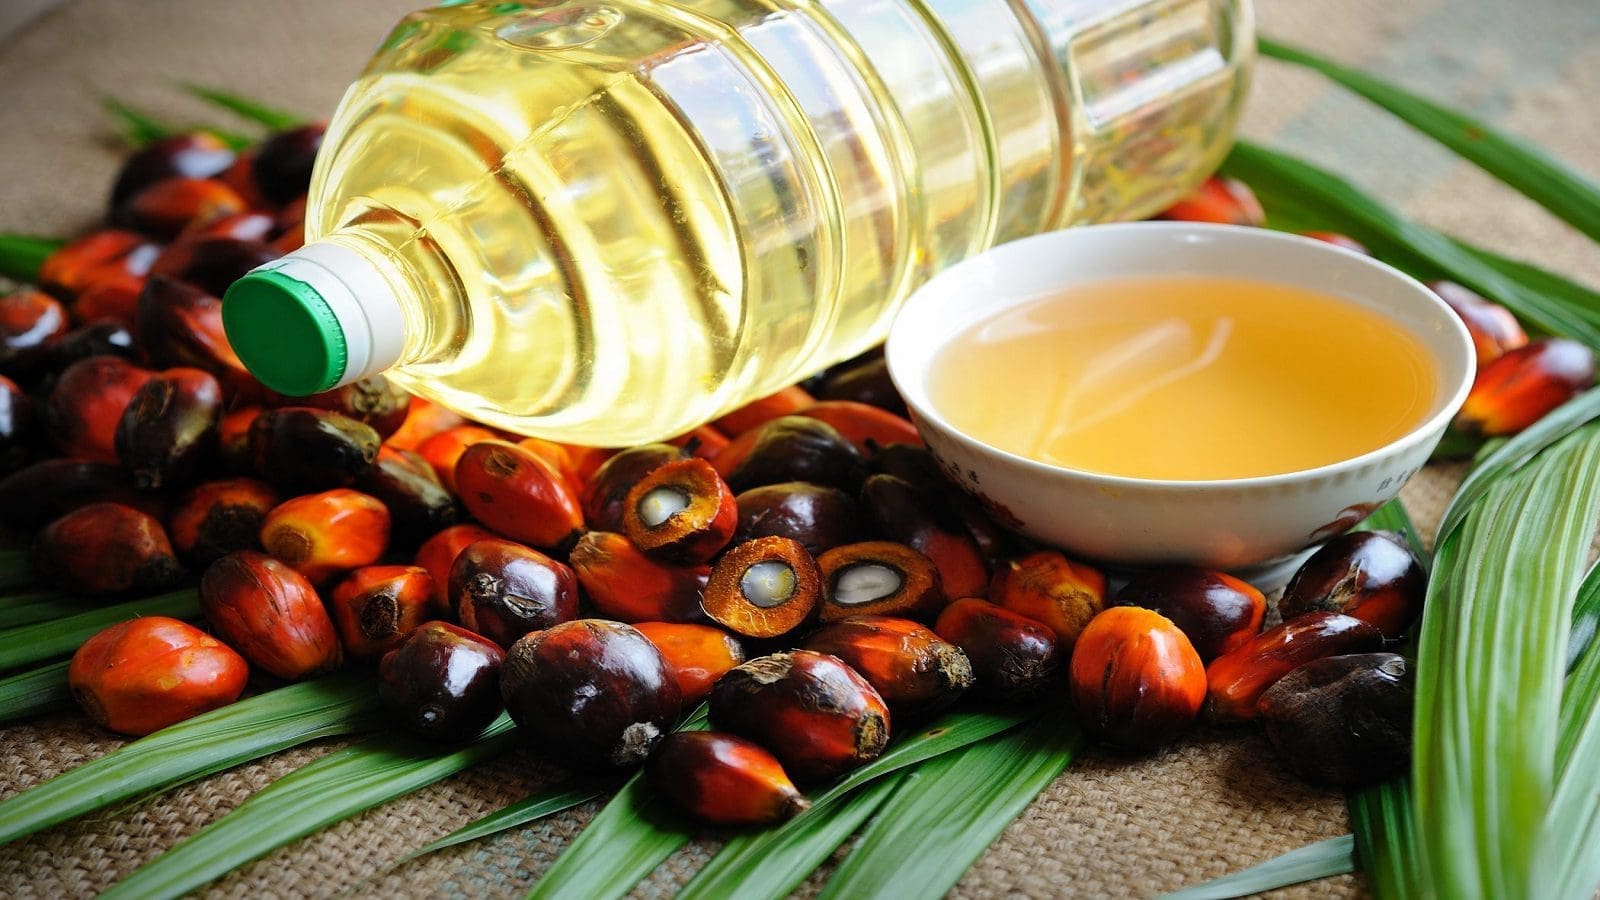 Four new palm oil refineries open in Cameroon amid raw material challenges